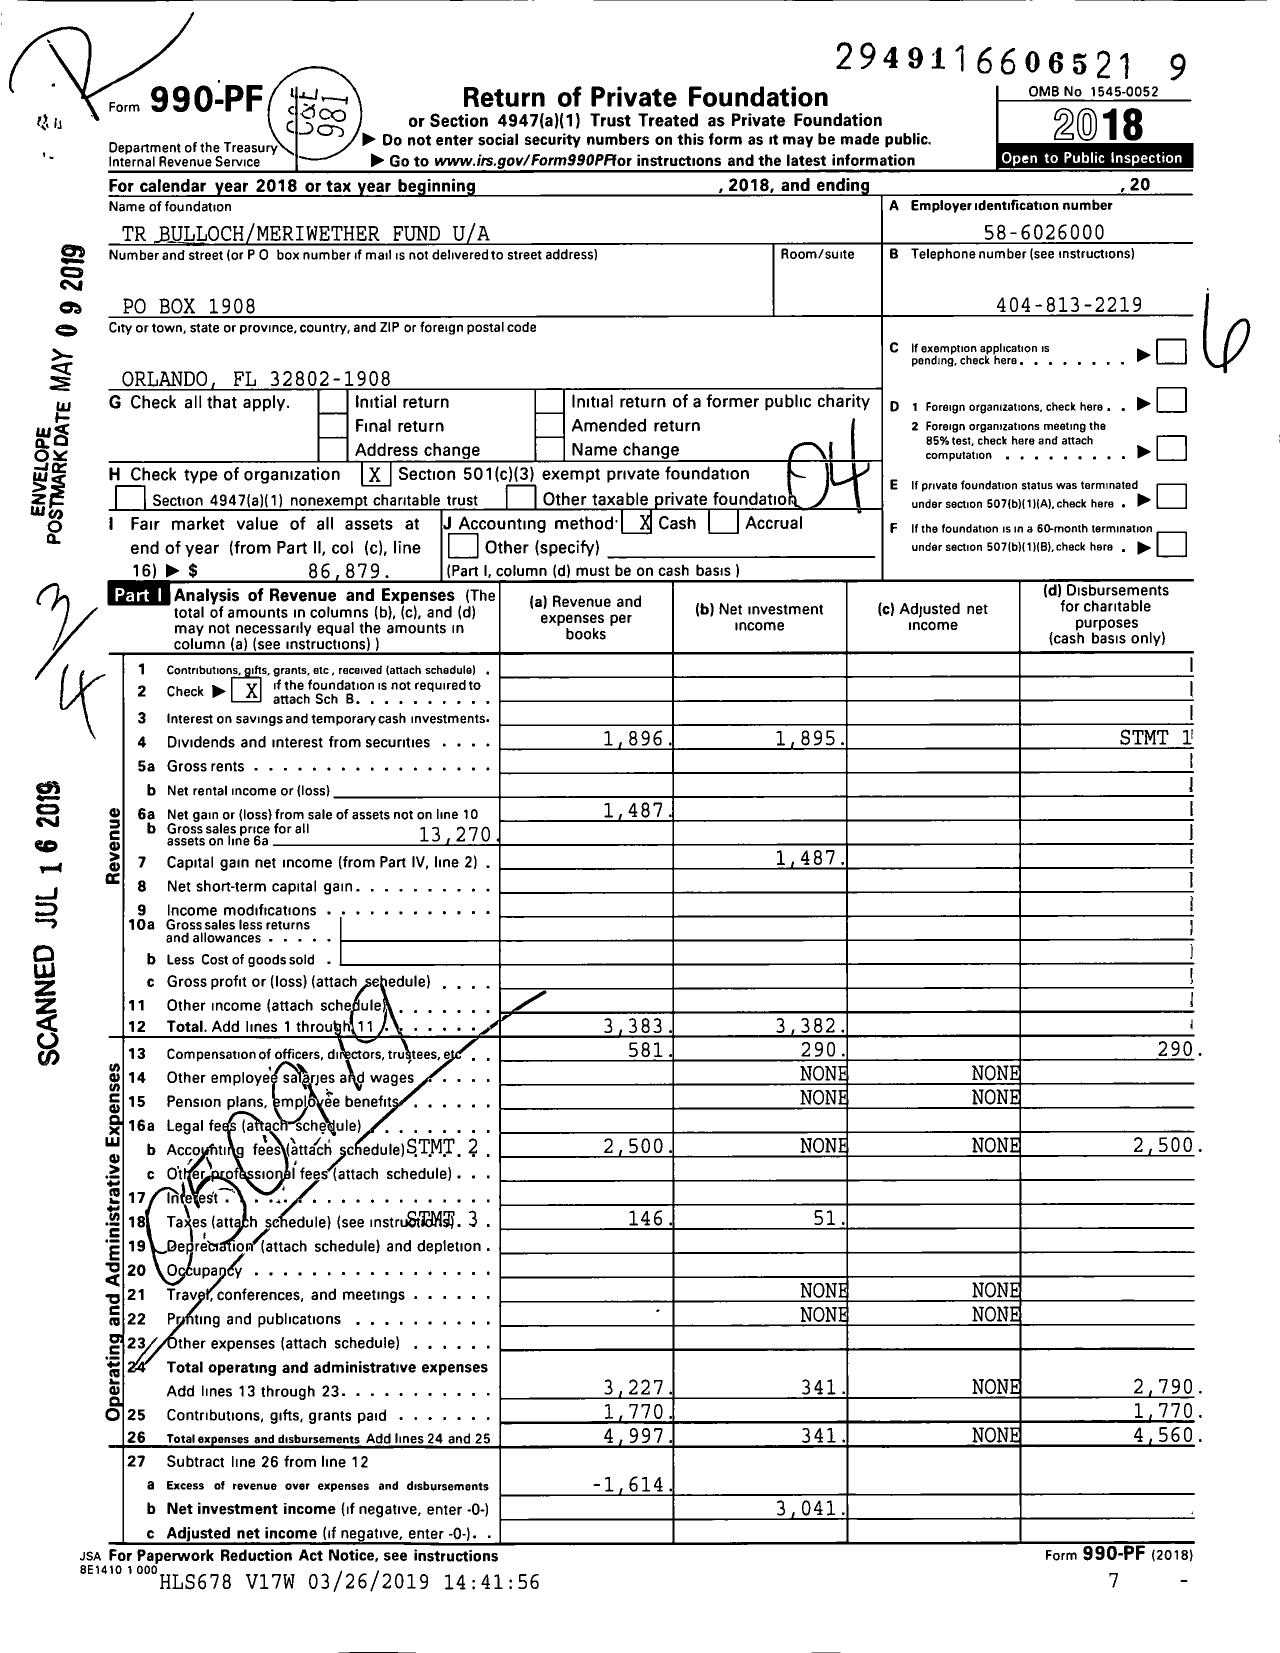 Image of first page of 2018 Form 990PF for TR Bullochmeriwether Fund